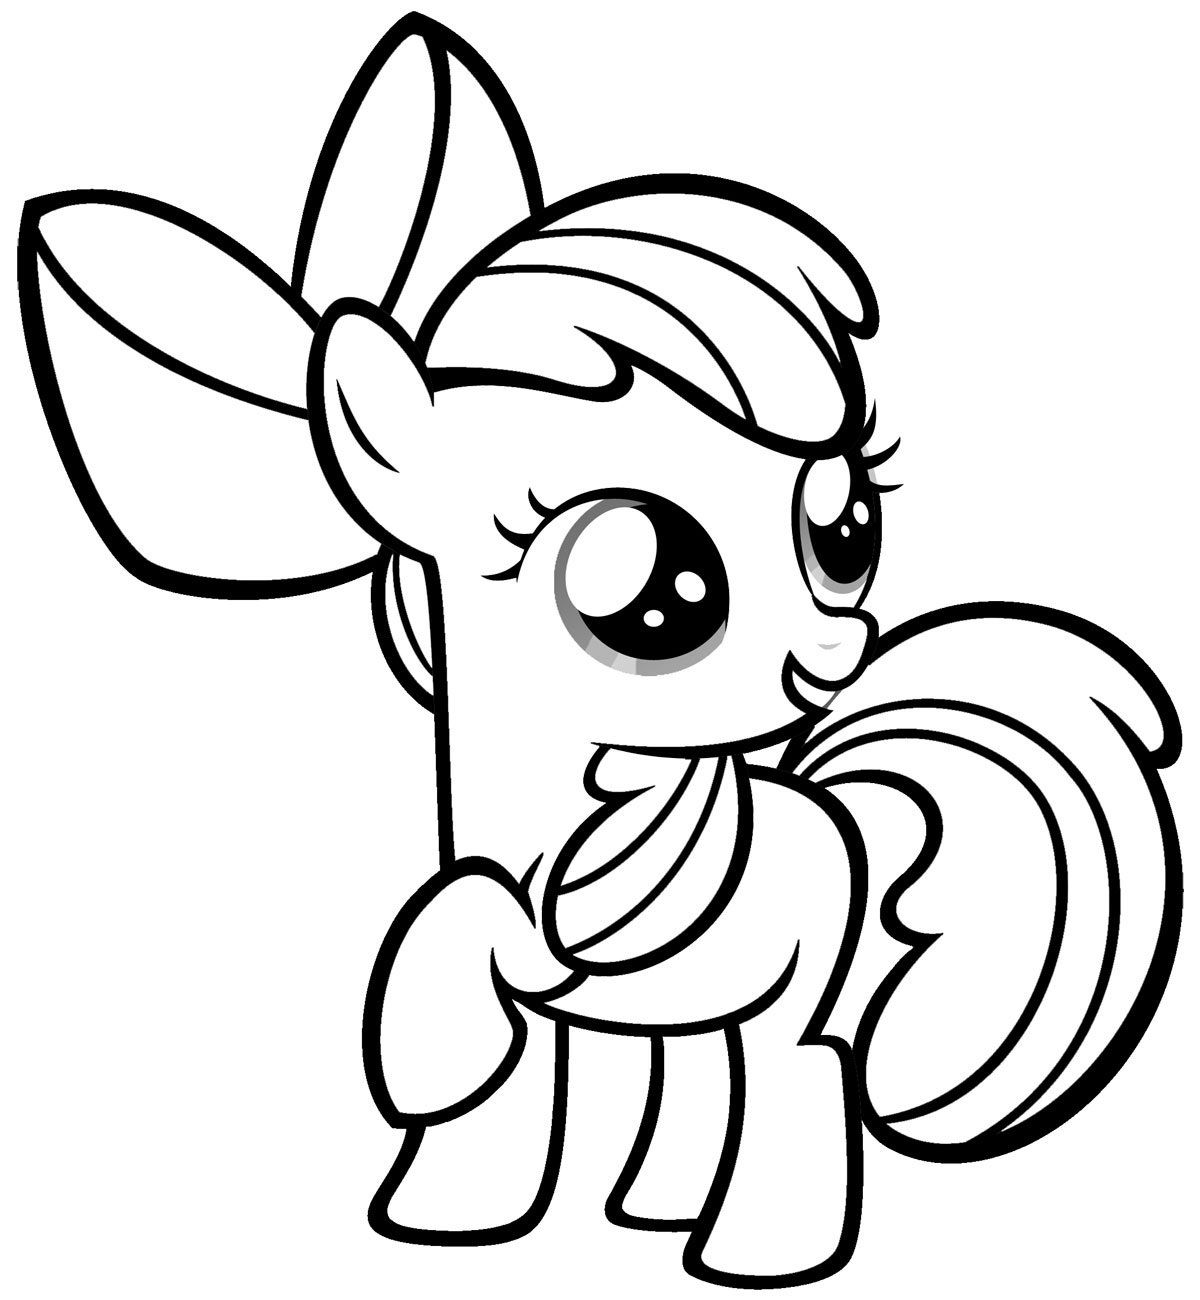 Free Printable My Little Pony Coloring Pages For Kids   My ...